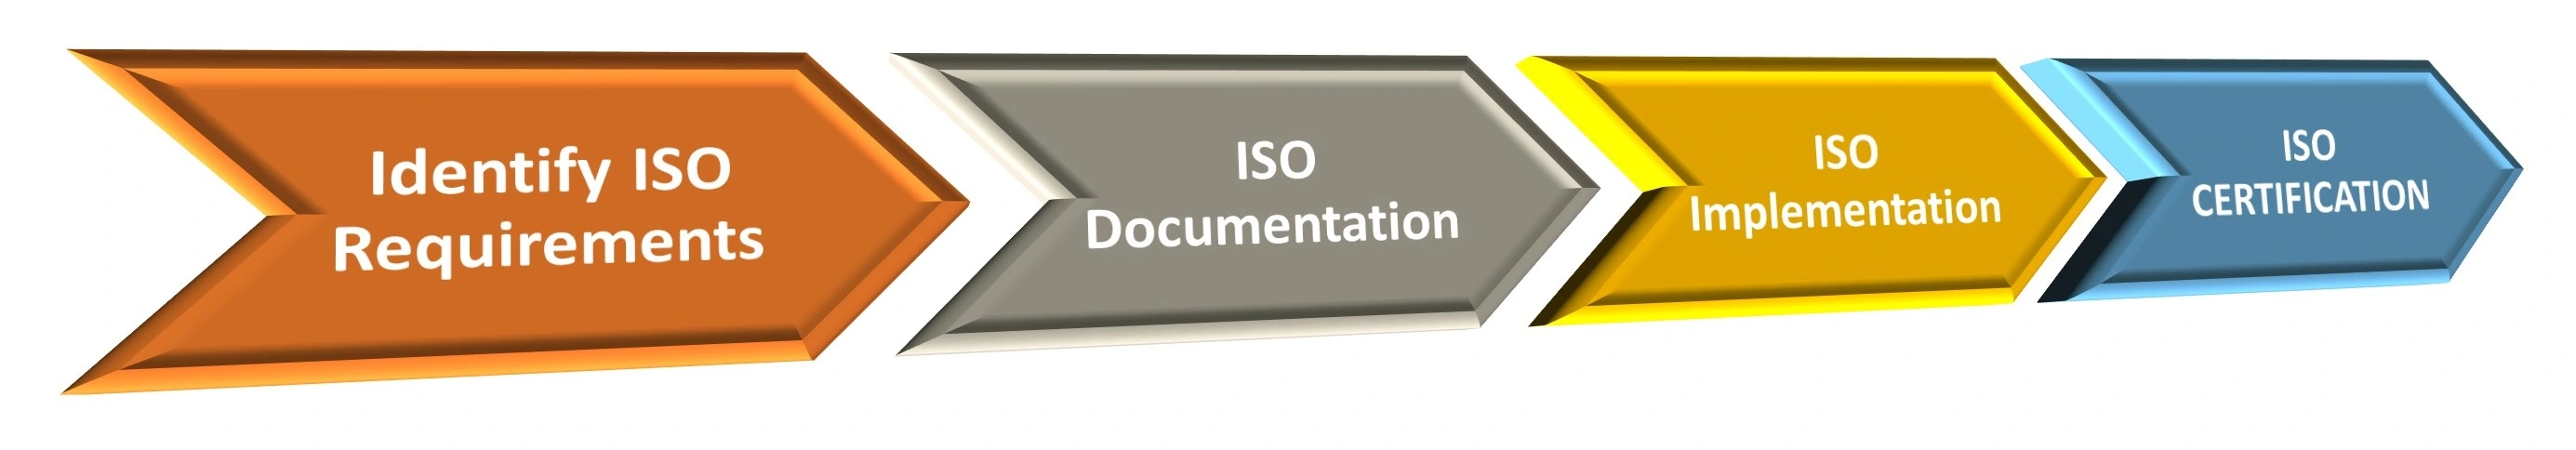 steps in ISO certification